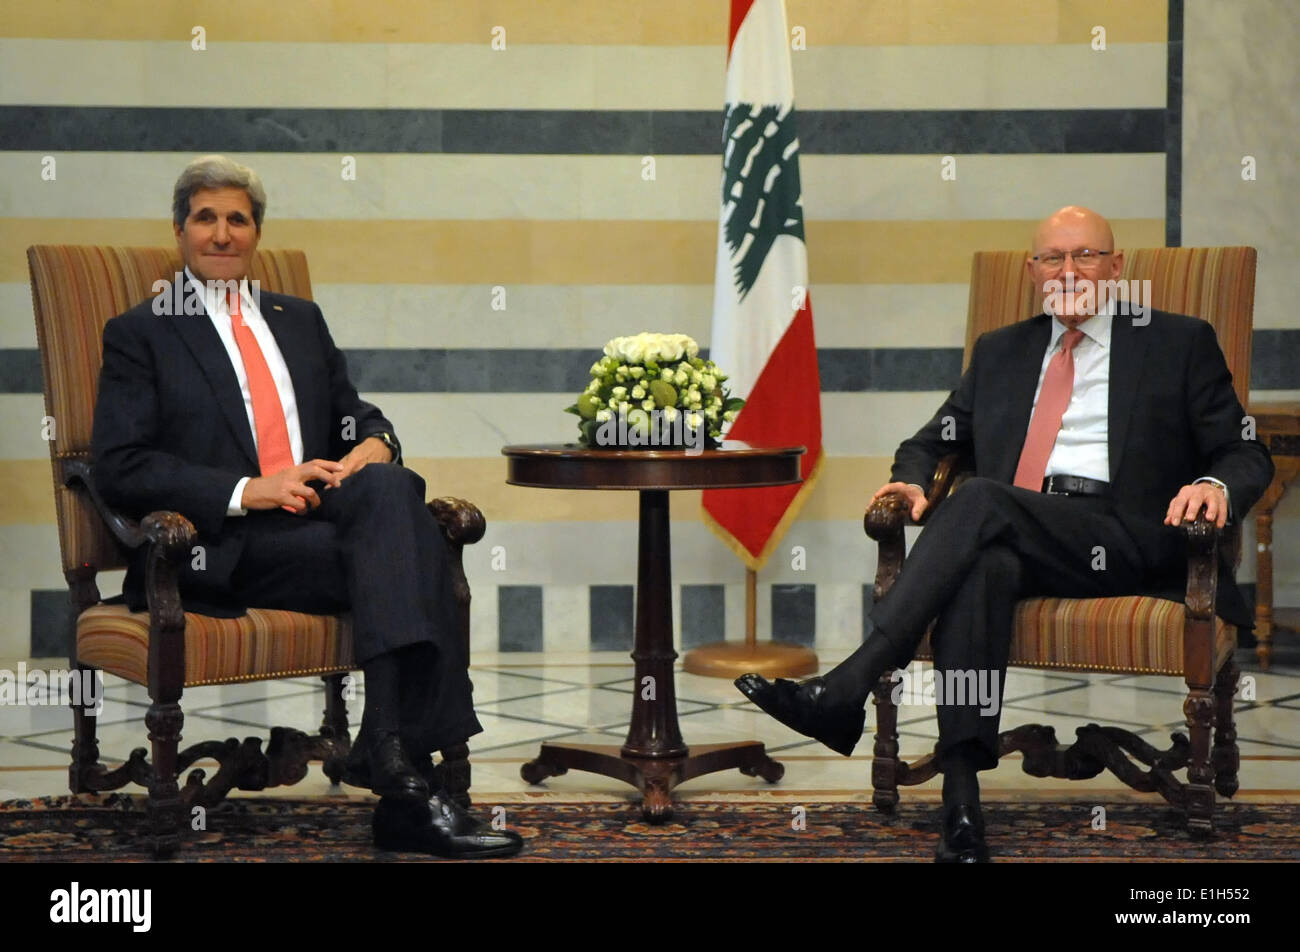 Beirut, Lebanon. 04th June, 2014. US Secretary of State John Kerry meets with Lebanese Prime Minister Tammam Salam at the Prime Minister's Office for meetings during a surprise visit June 4, 2014 in Beirut, Lebanon. Credit:  Planetpix/Alamy Live News Stock Photo